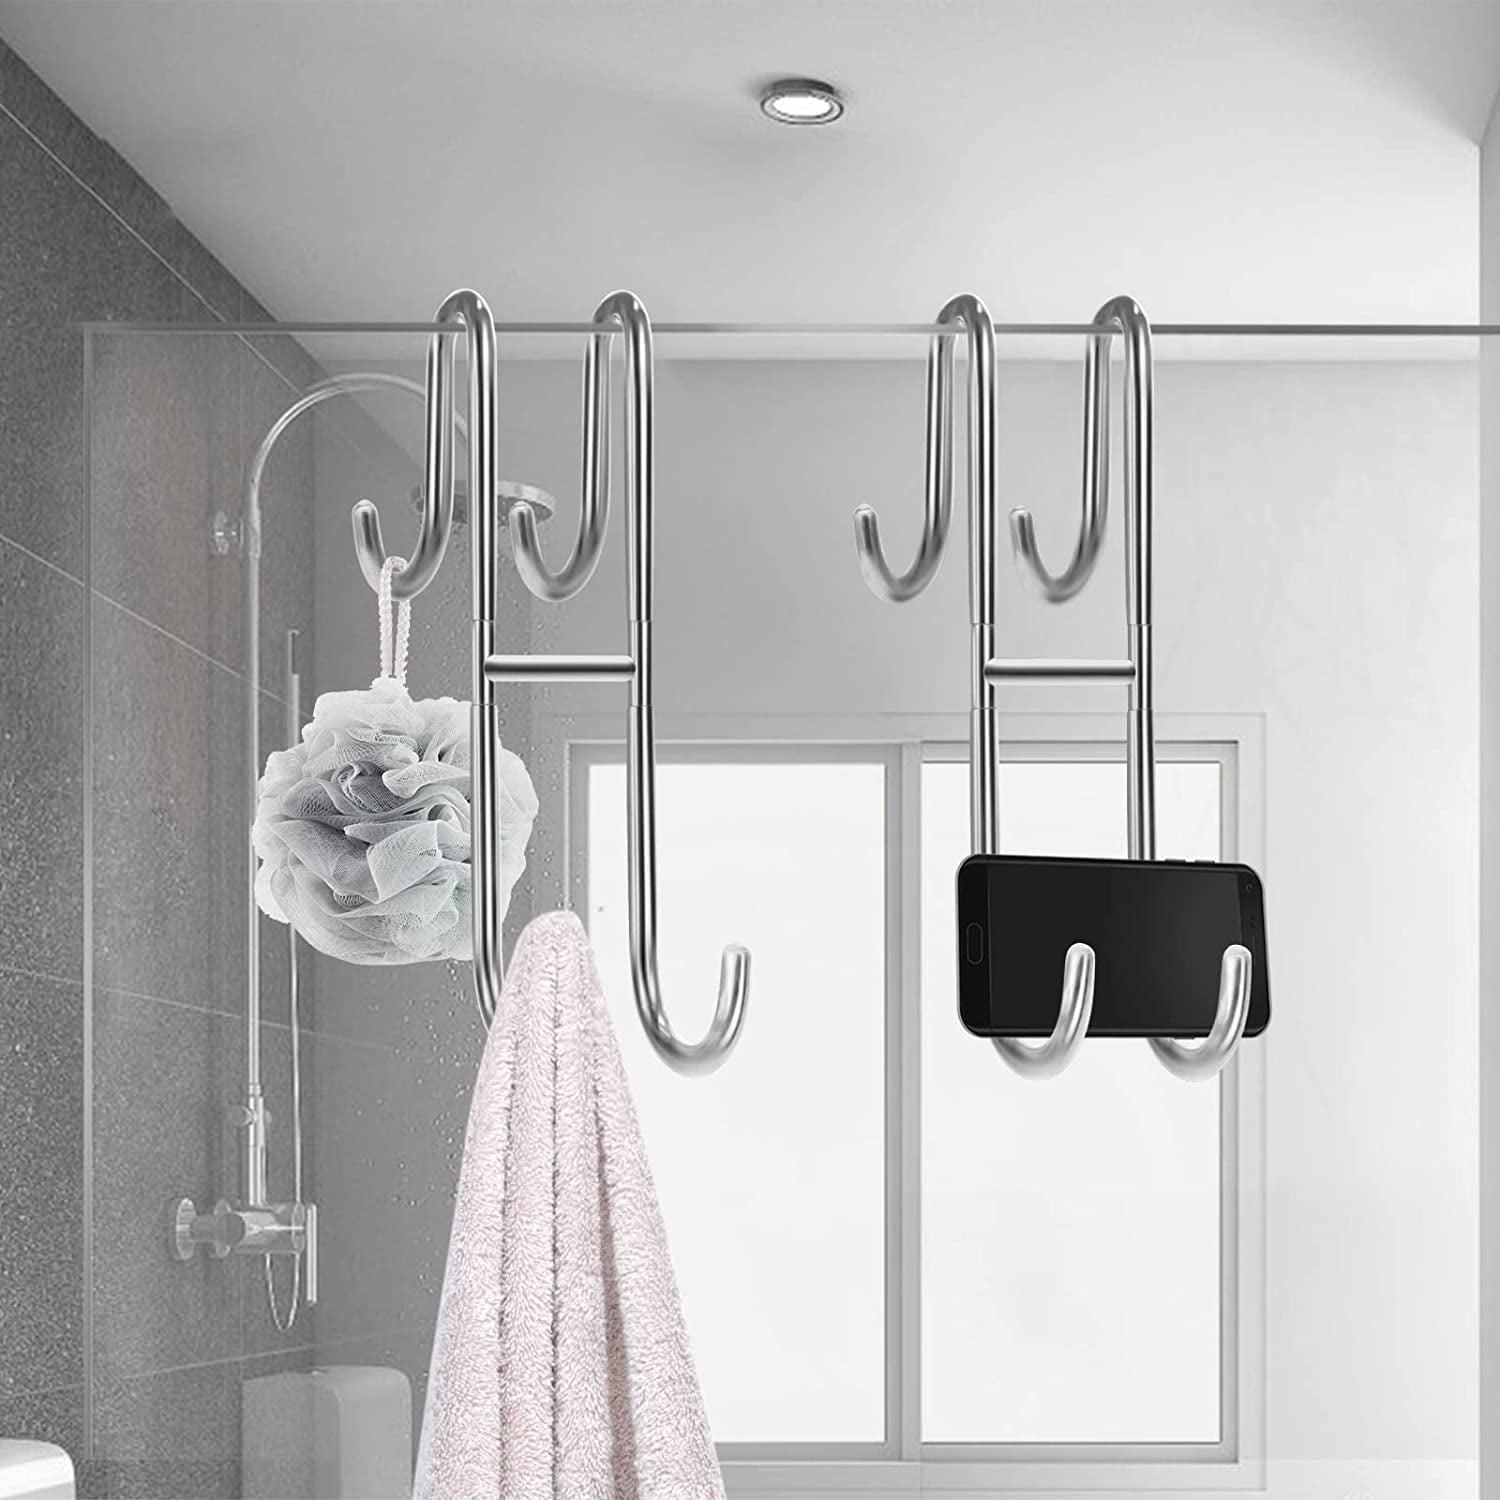 MOKIUER Double Hooks for Glass Shower Door, Towel Hooks Over The Bathroom  Glass Wall 0.31-0.39in, Stainless Steel, Brushed,2 Pack.